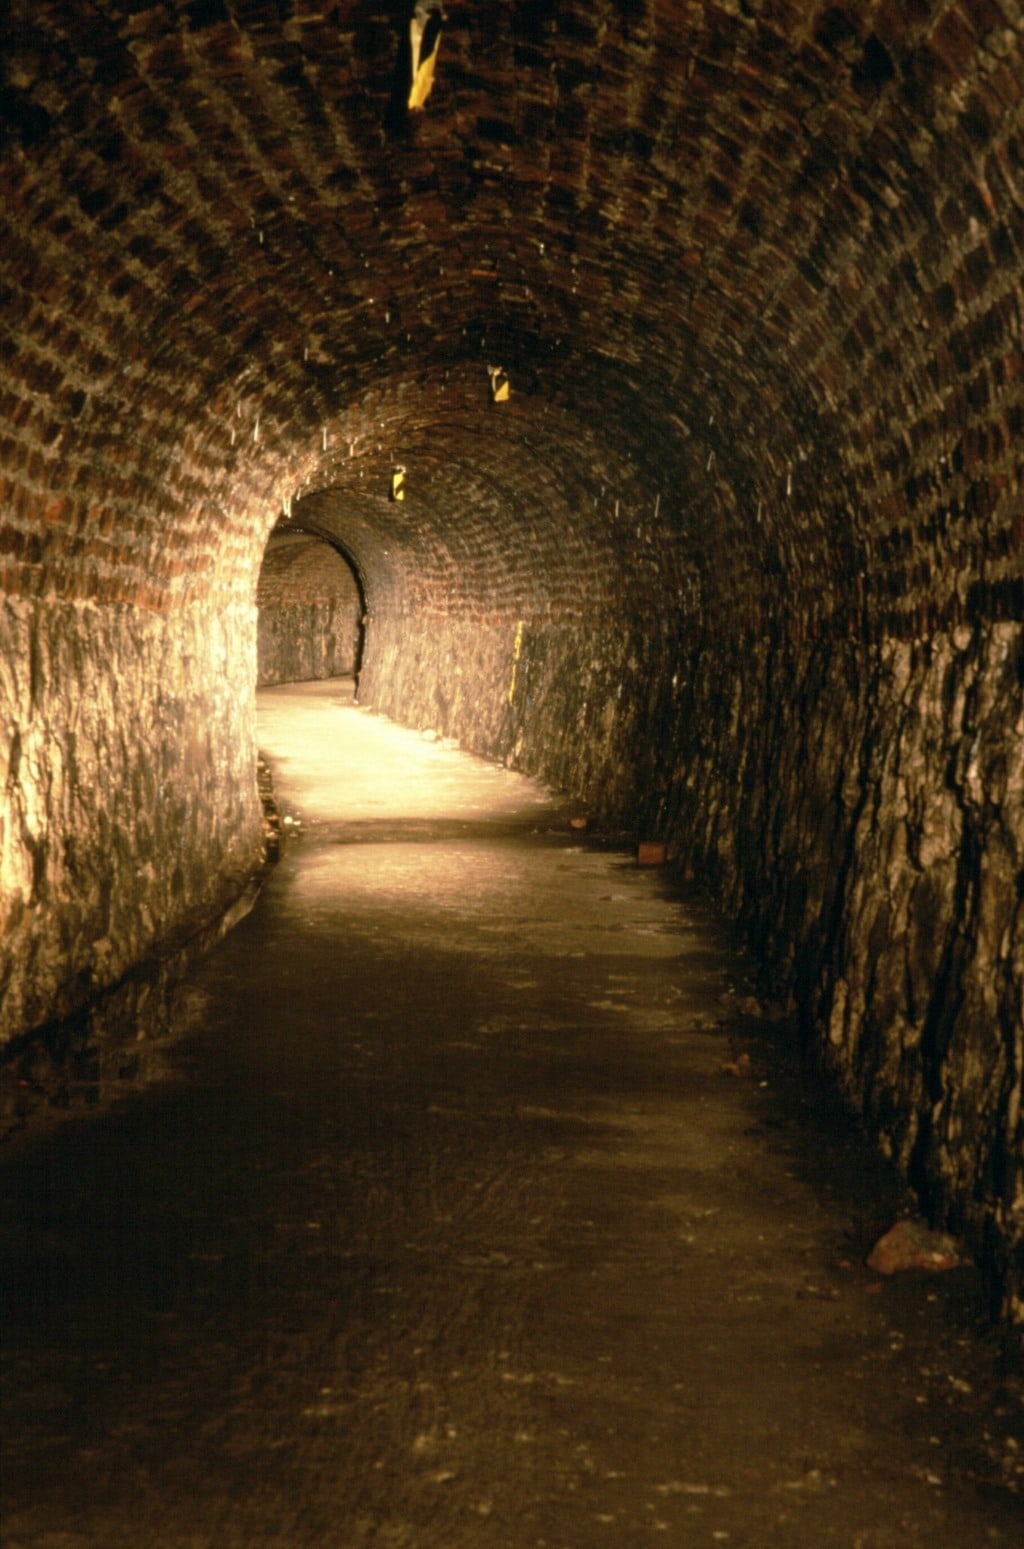 Victoria Tunnel in Newcastle upon Tyne